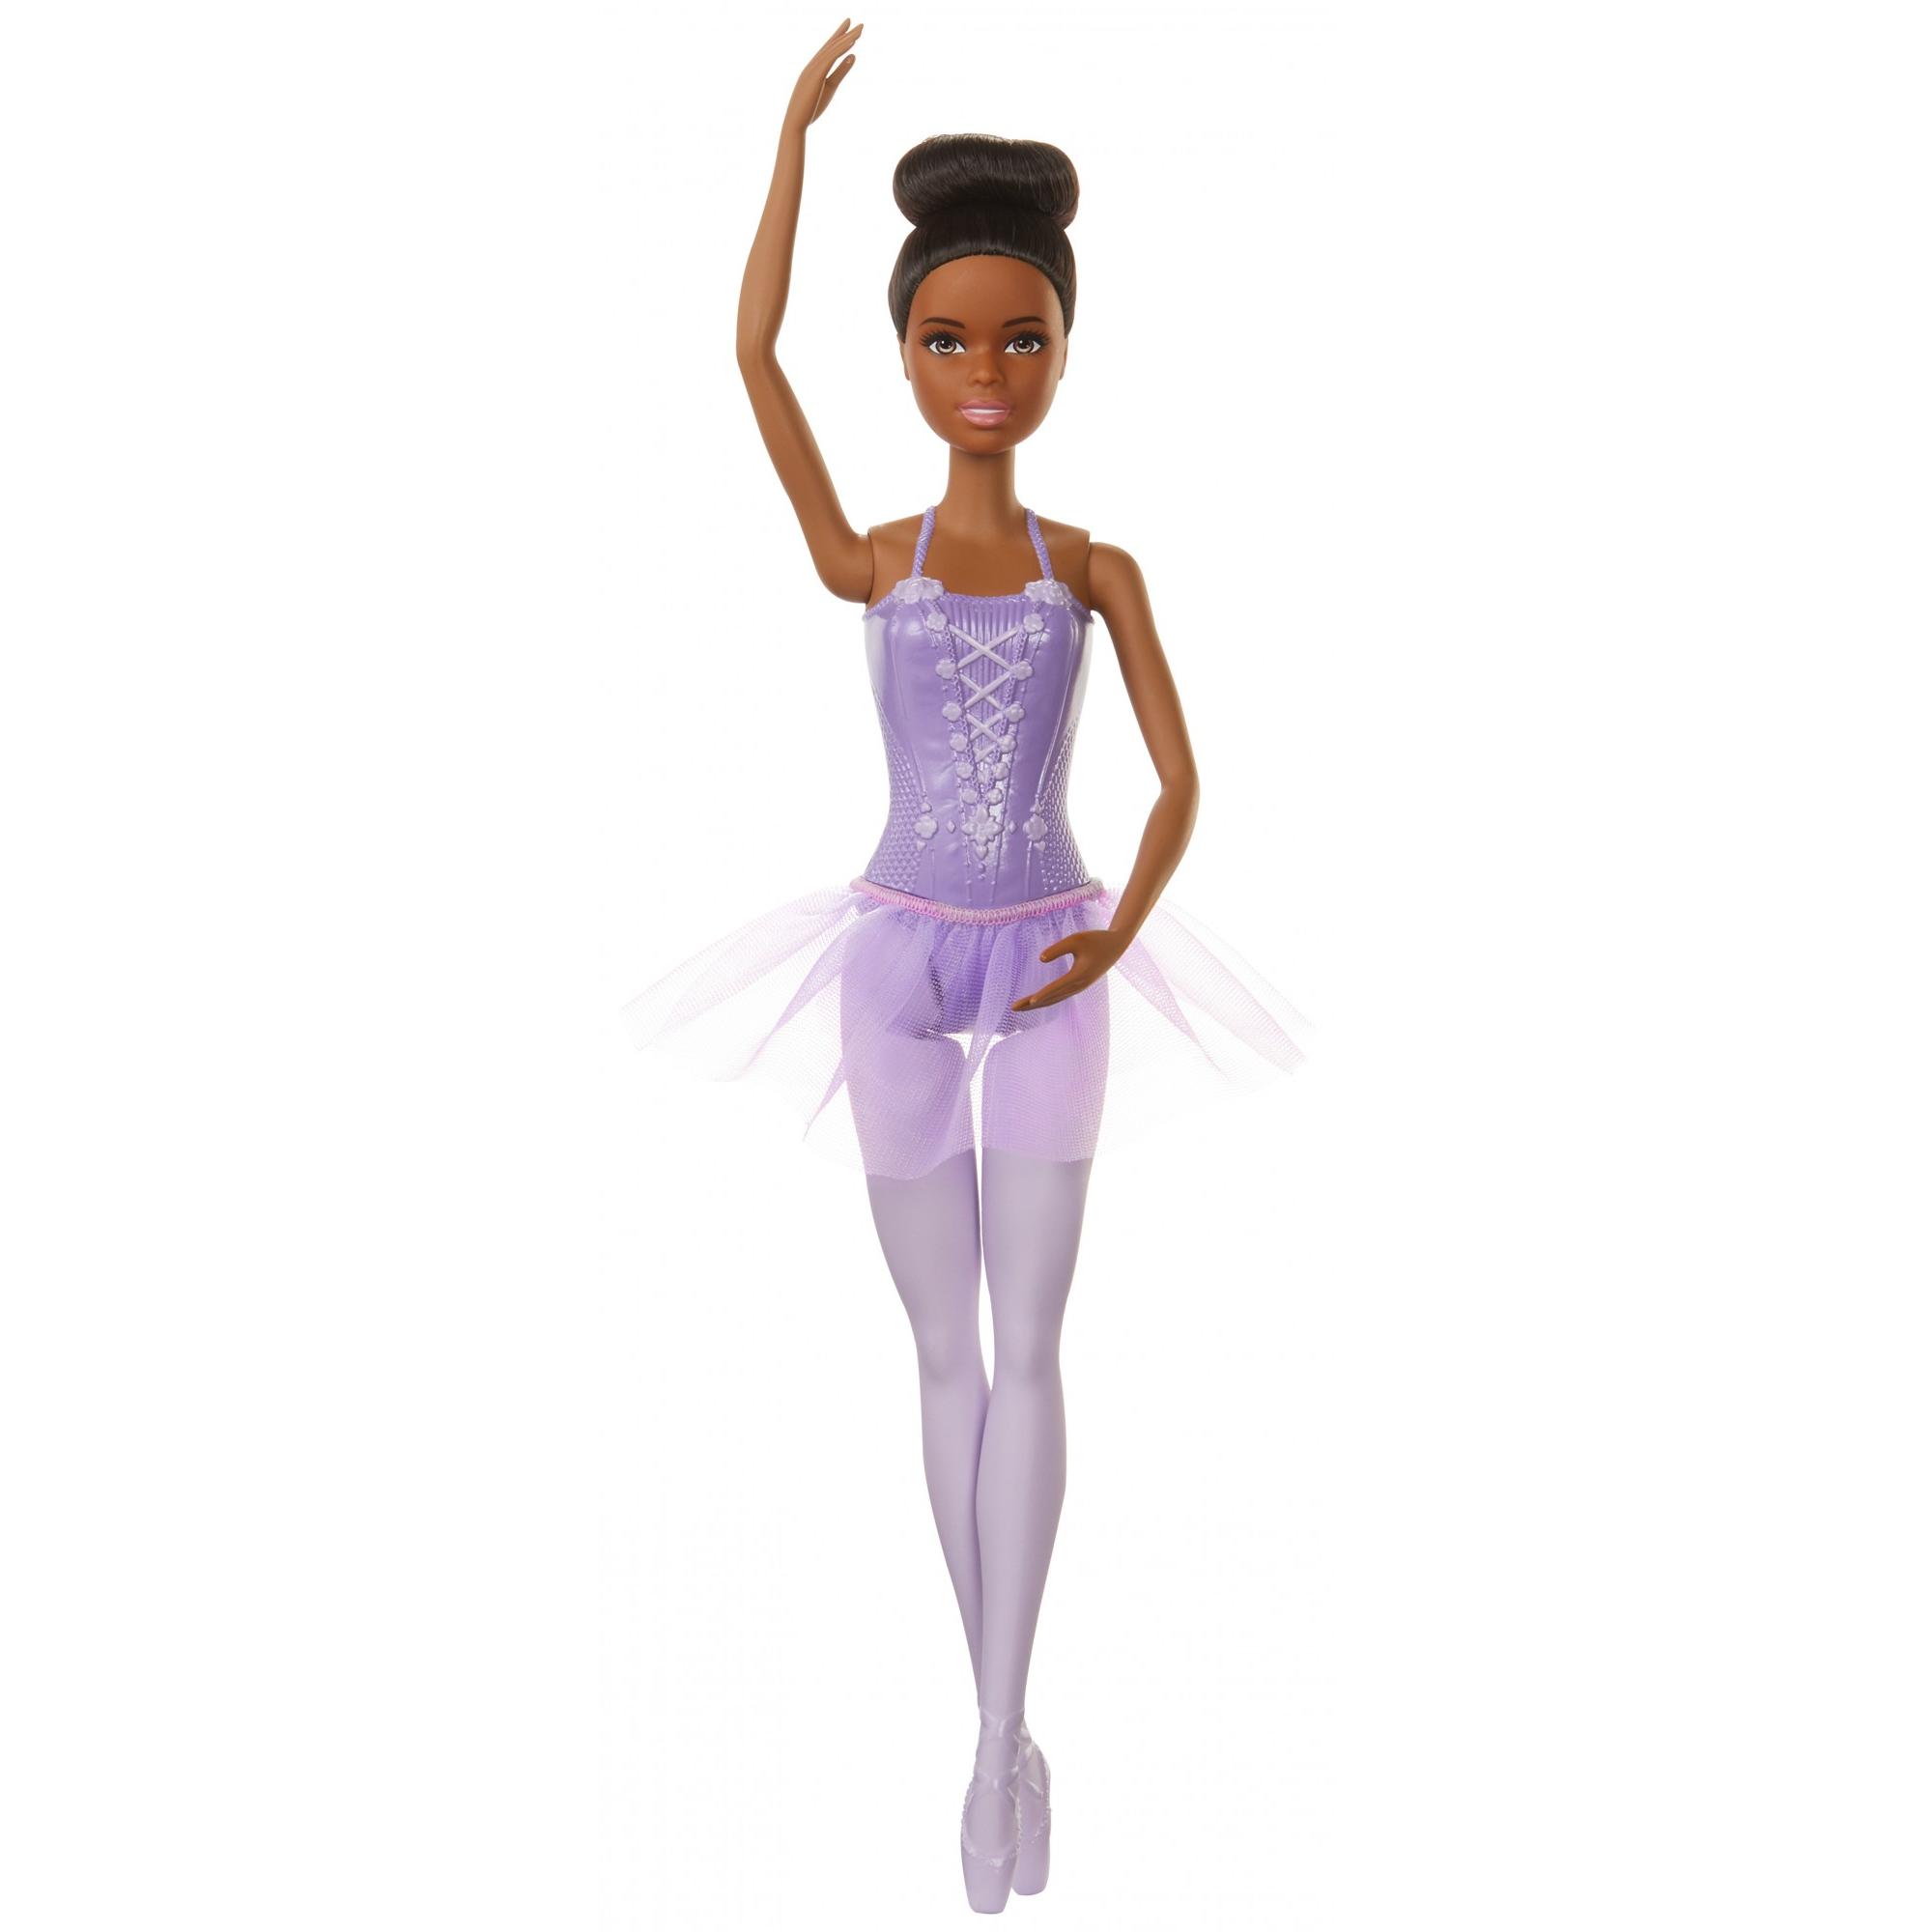 Barbie Ballerina Doll with Tutu, Ballet Arms & Sculpted Toe Shoes (Styles May Vary) - image 4 of 4